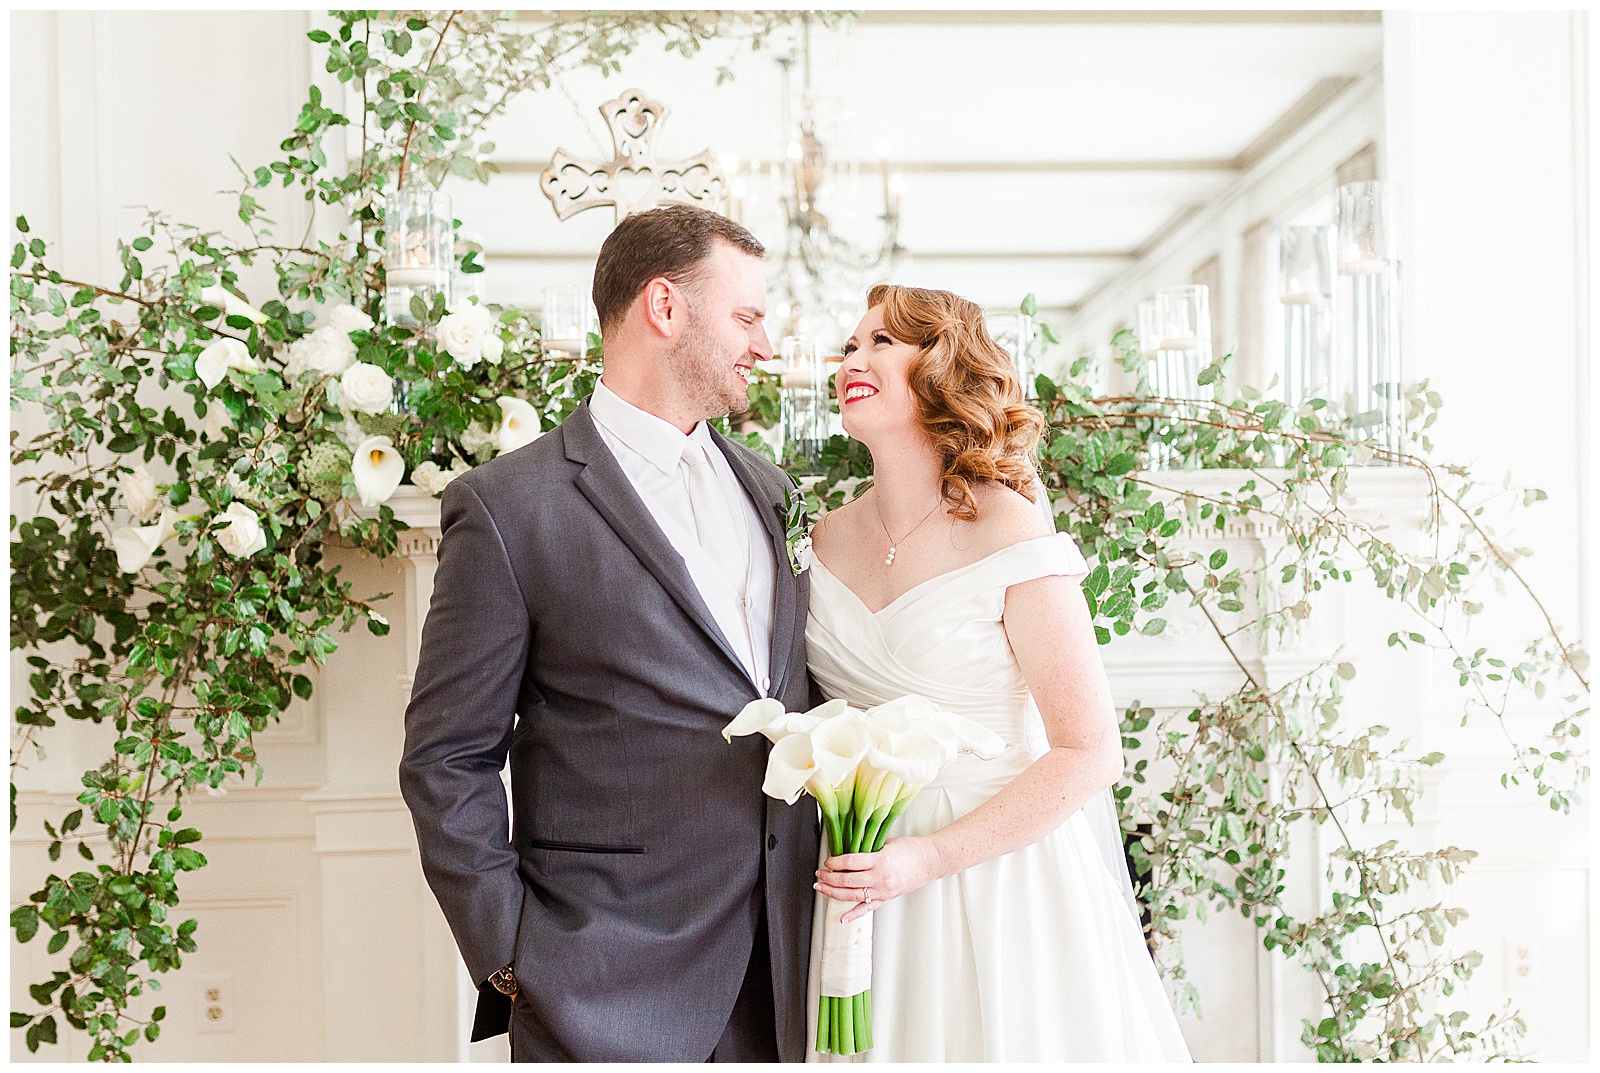 Gorgeous Bride Groom Portraits at elegant indoor floral venue in 1940s Modern Vintage Wedding in Charlotte, NC | check out the full wedding at KevynDixonPhoto.com